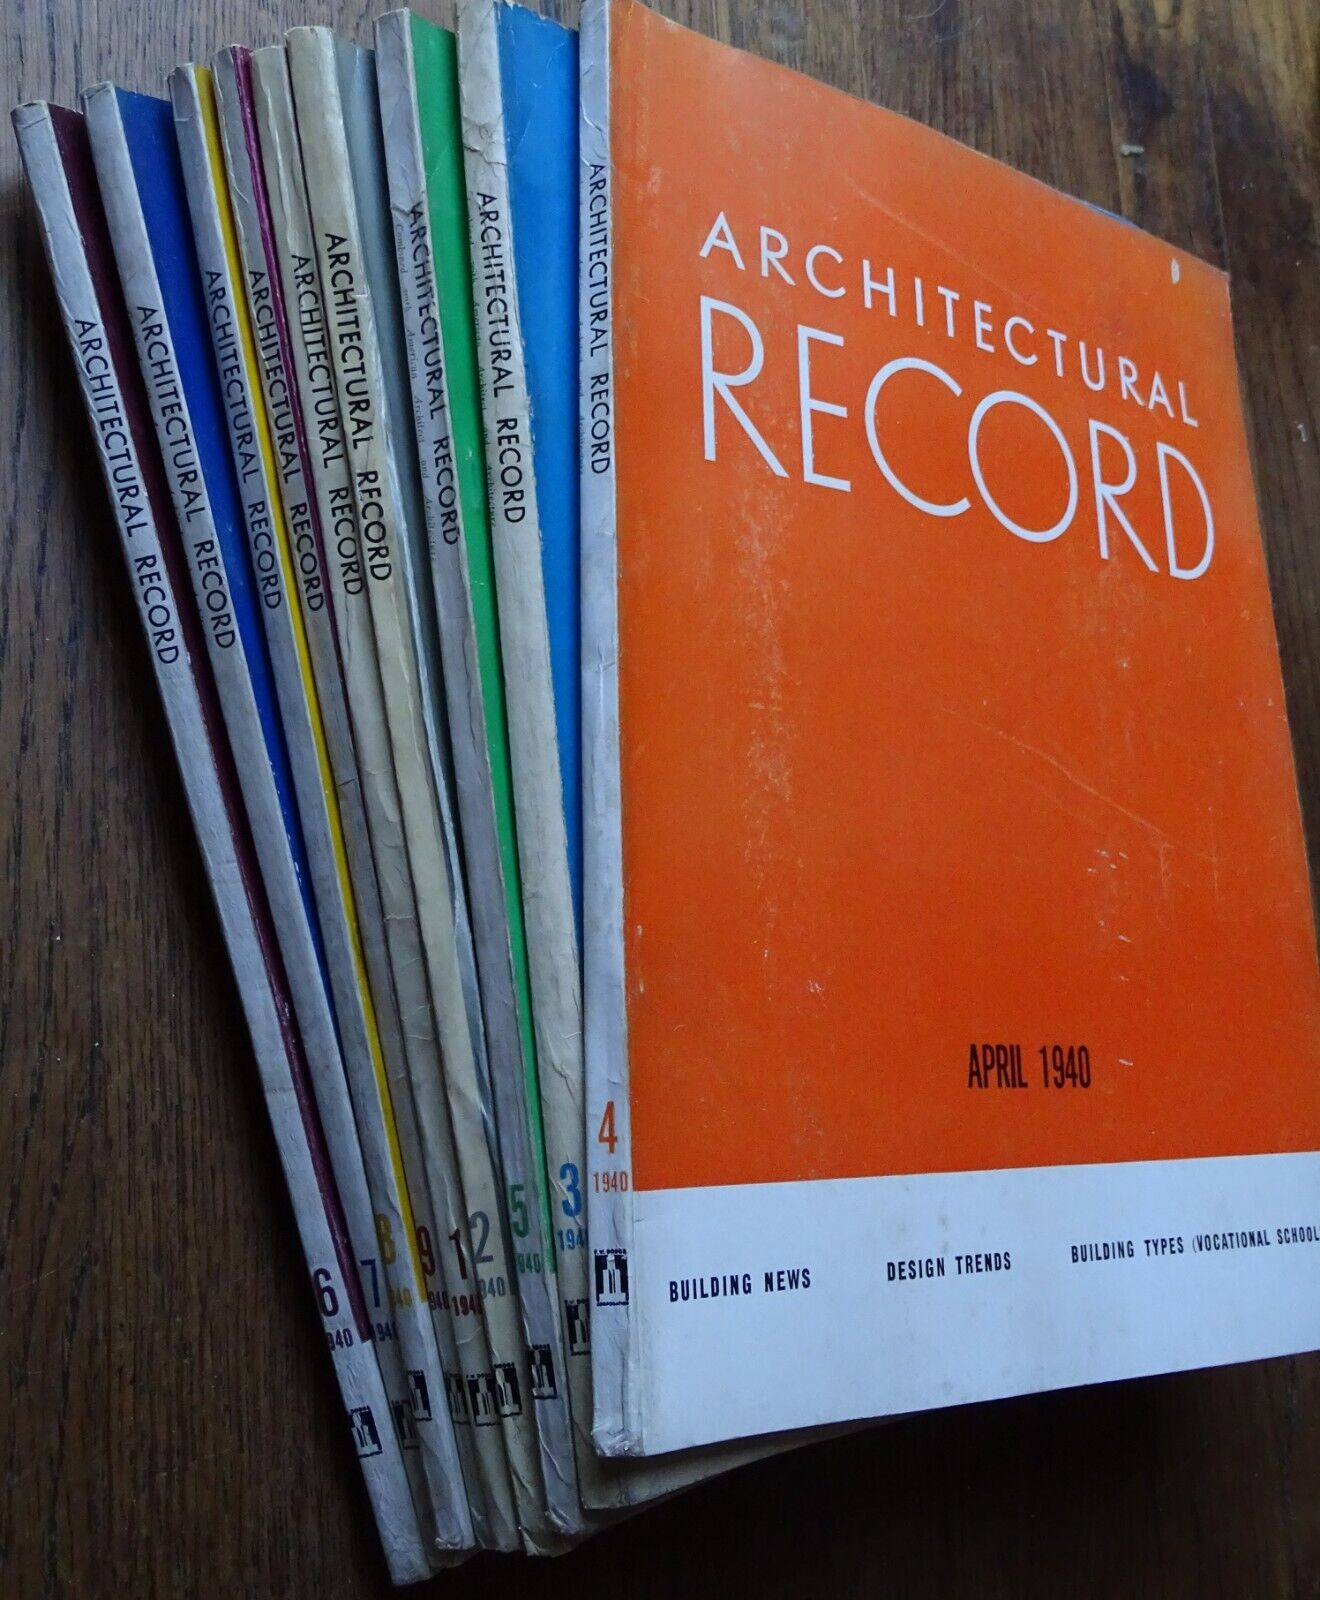 Architectural Record Magazine 1940 (9 Issues) Jan-Sept. (Building News, Designs)